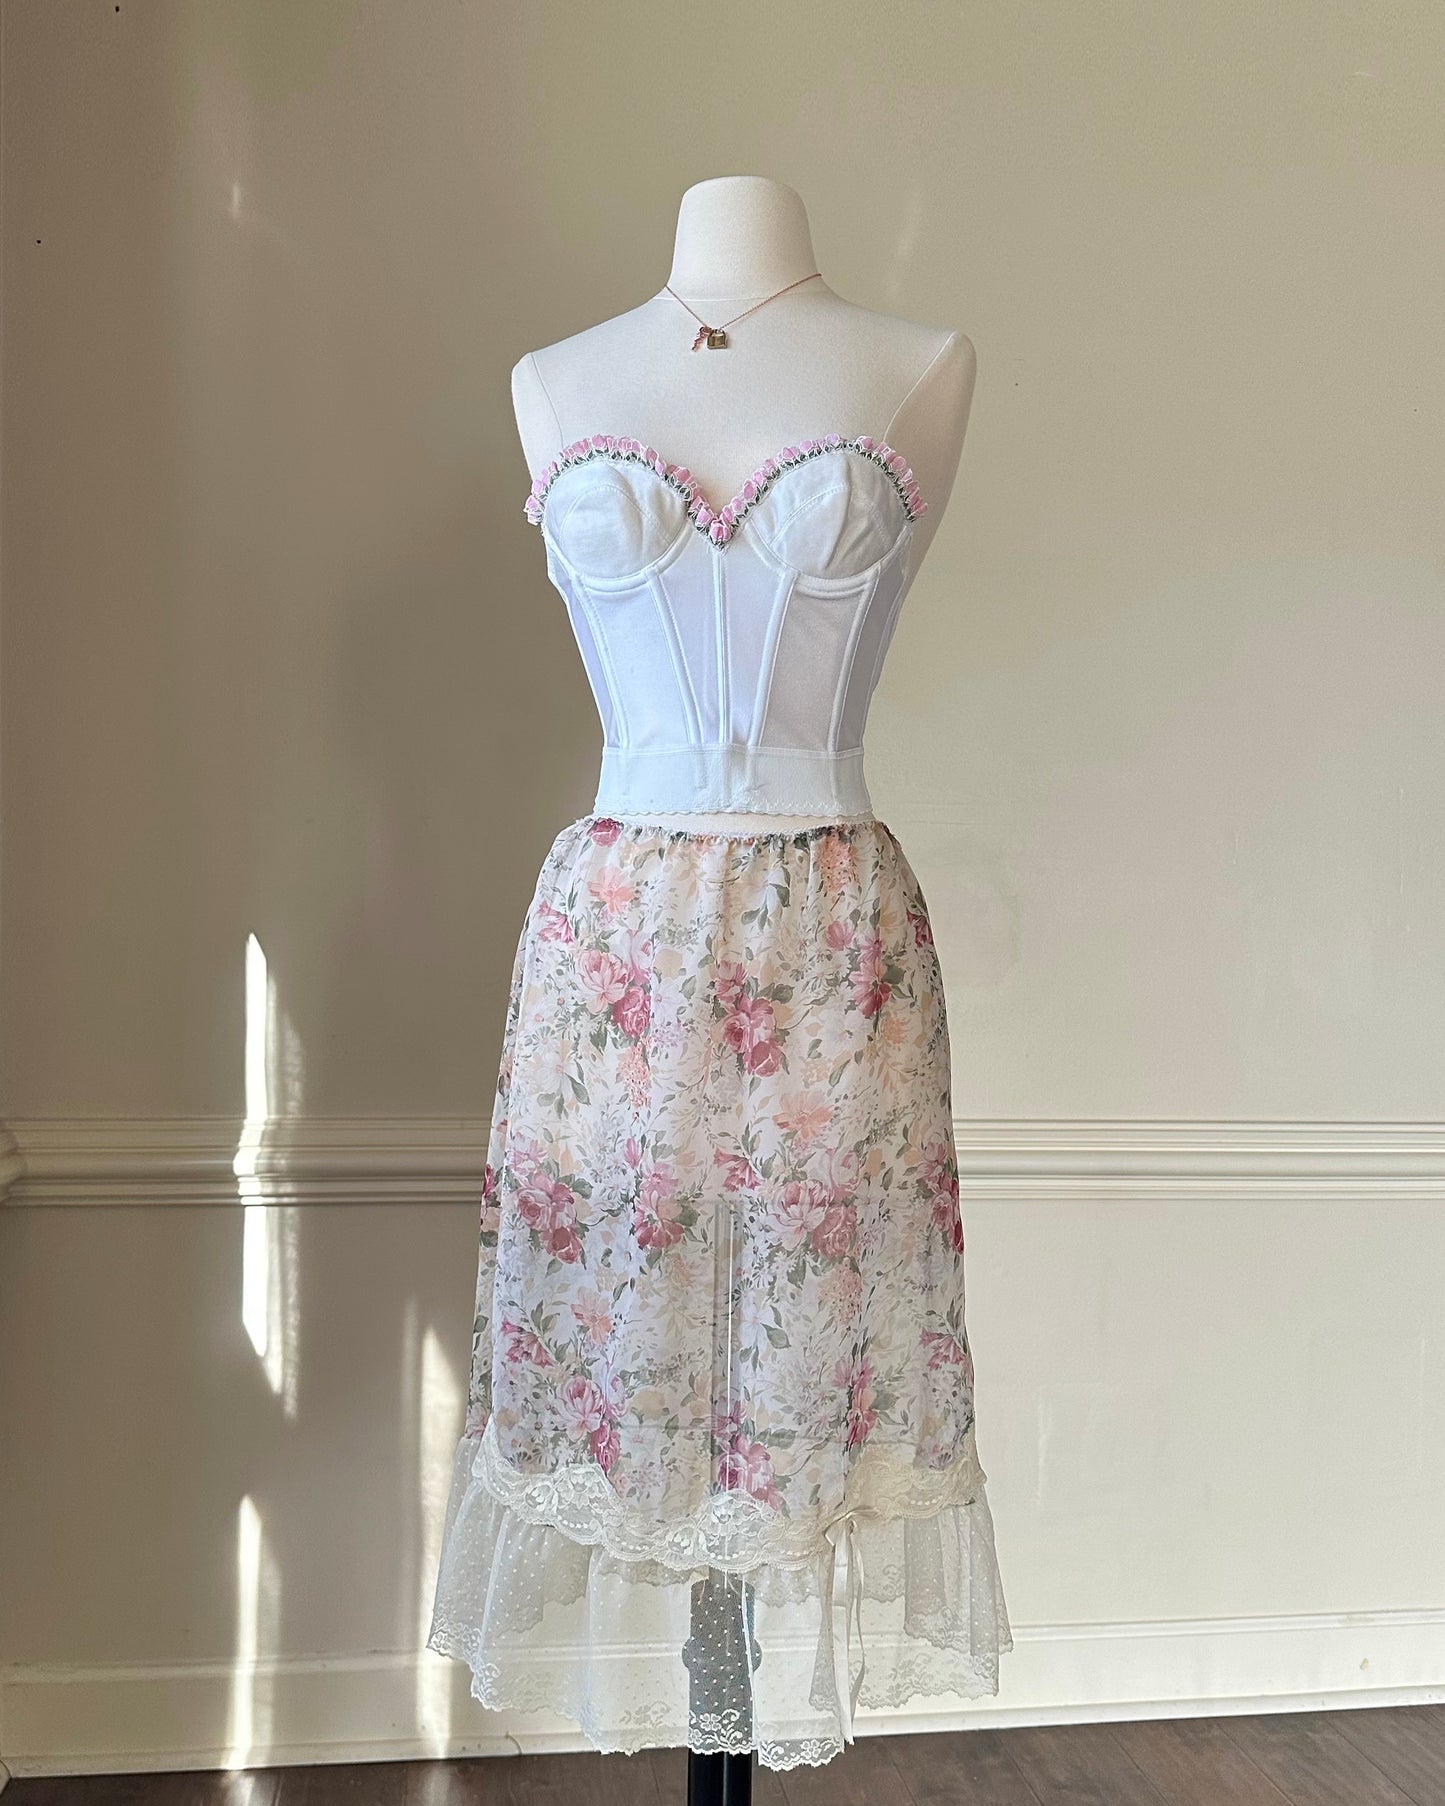 Dreamy Sheer Vintage Floral Dress featuring Rose Garden Prints with Soft Lace Skirt